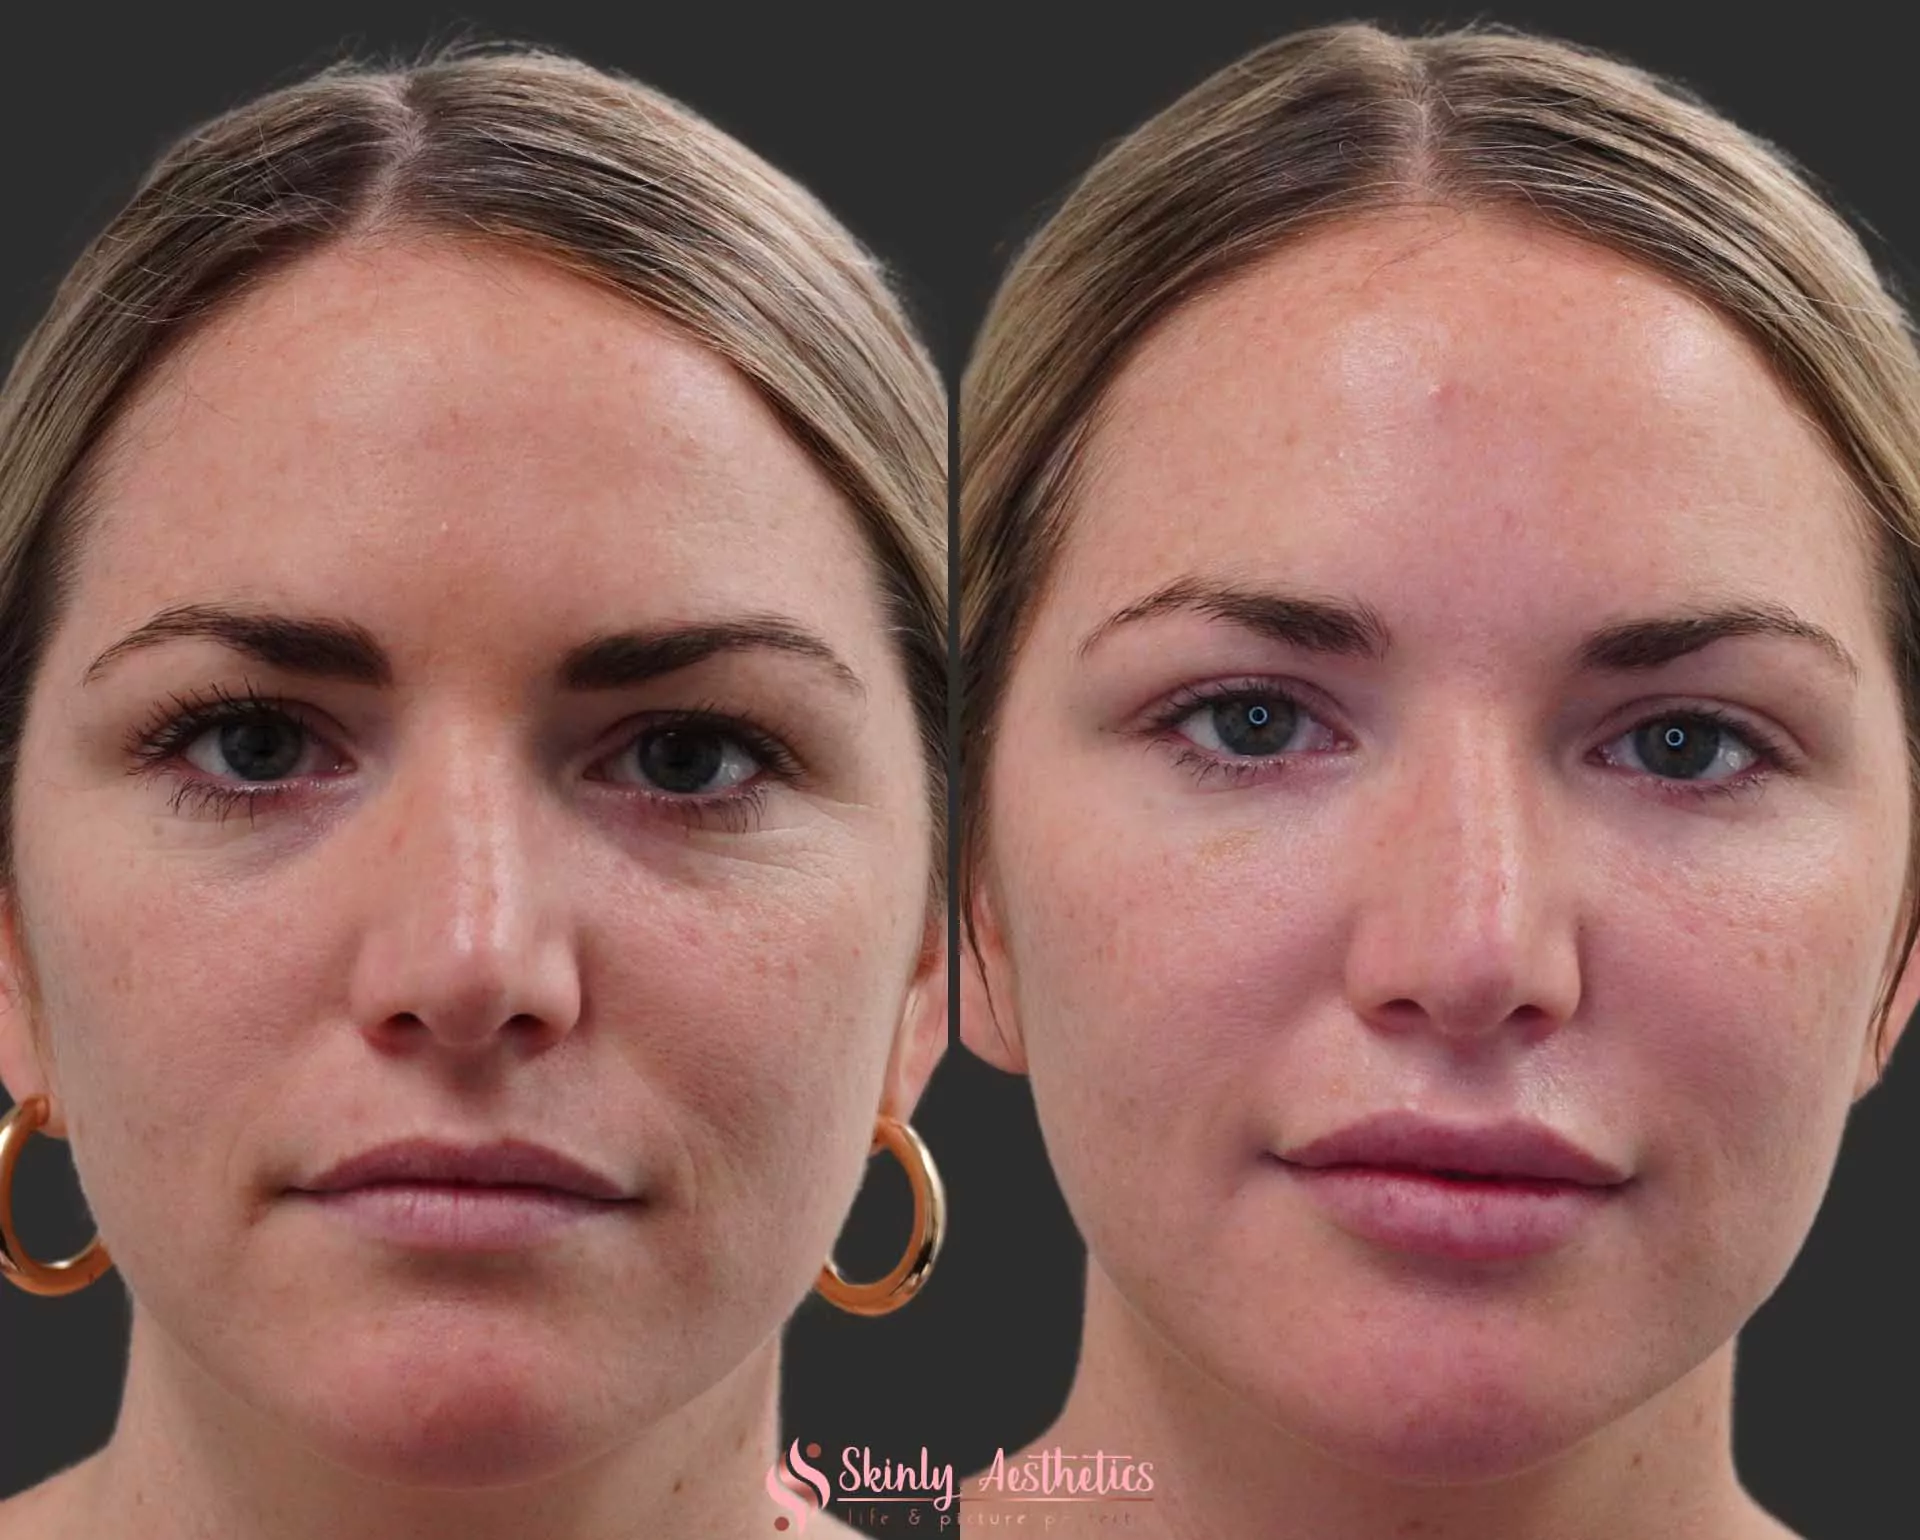 under eye hollow circles treated with Juvederm ultra dermal filler